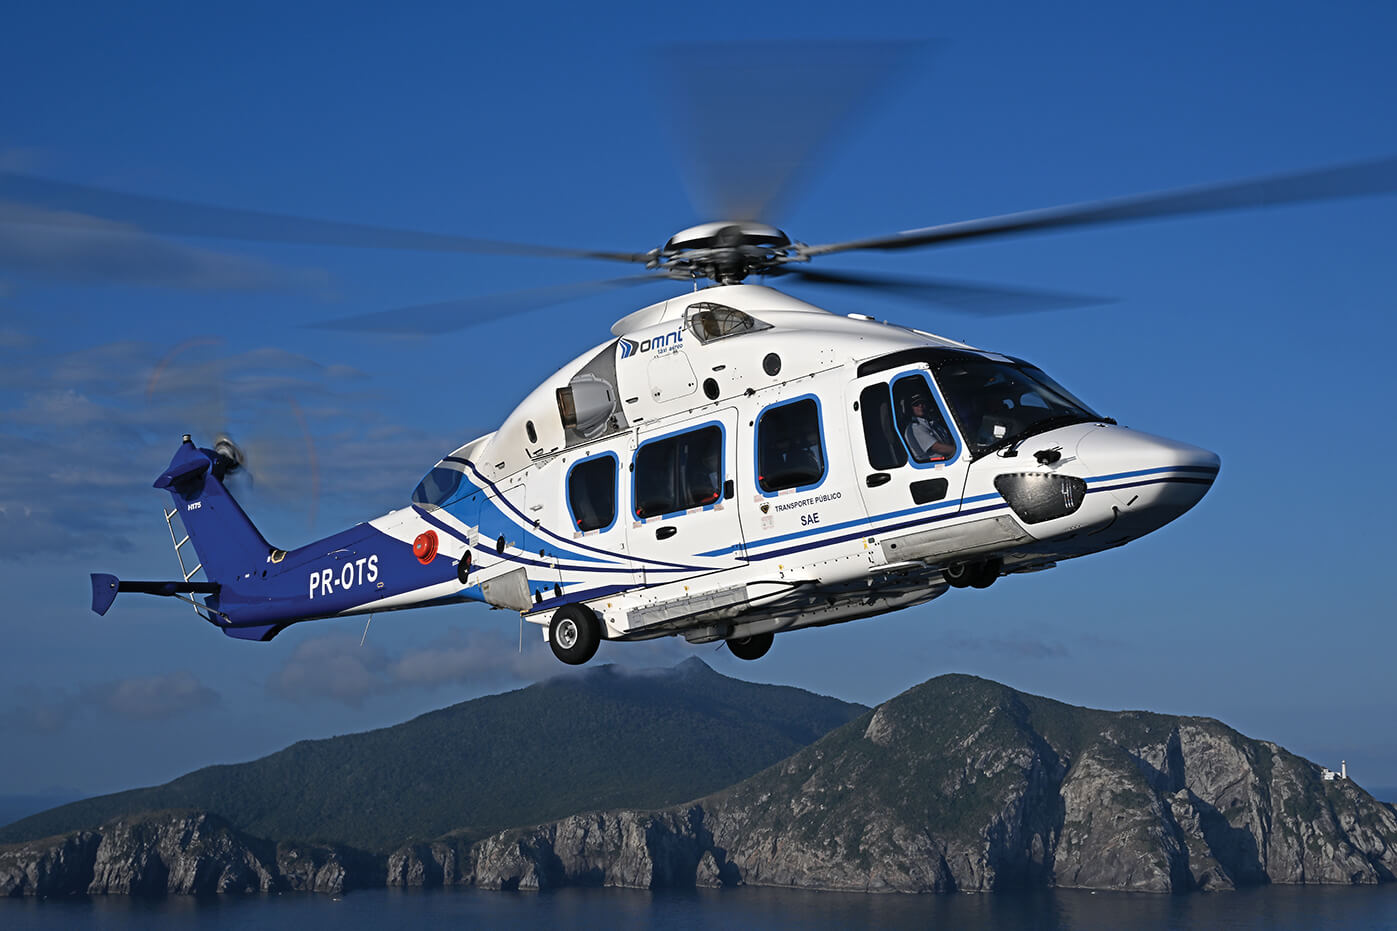 S-92 difficulties helping fuel interest in H175